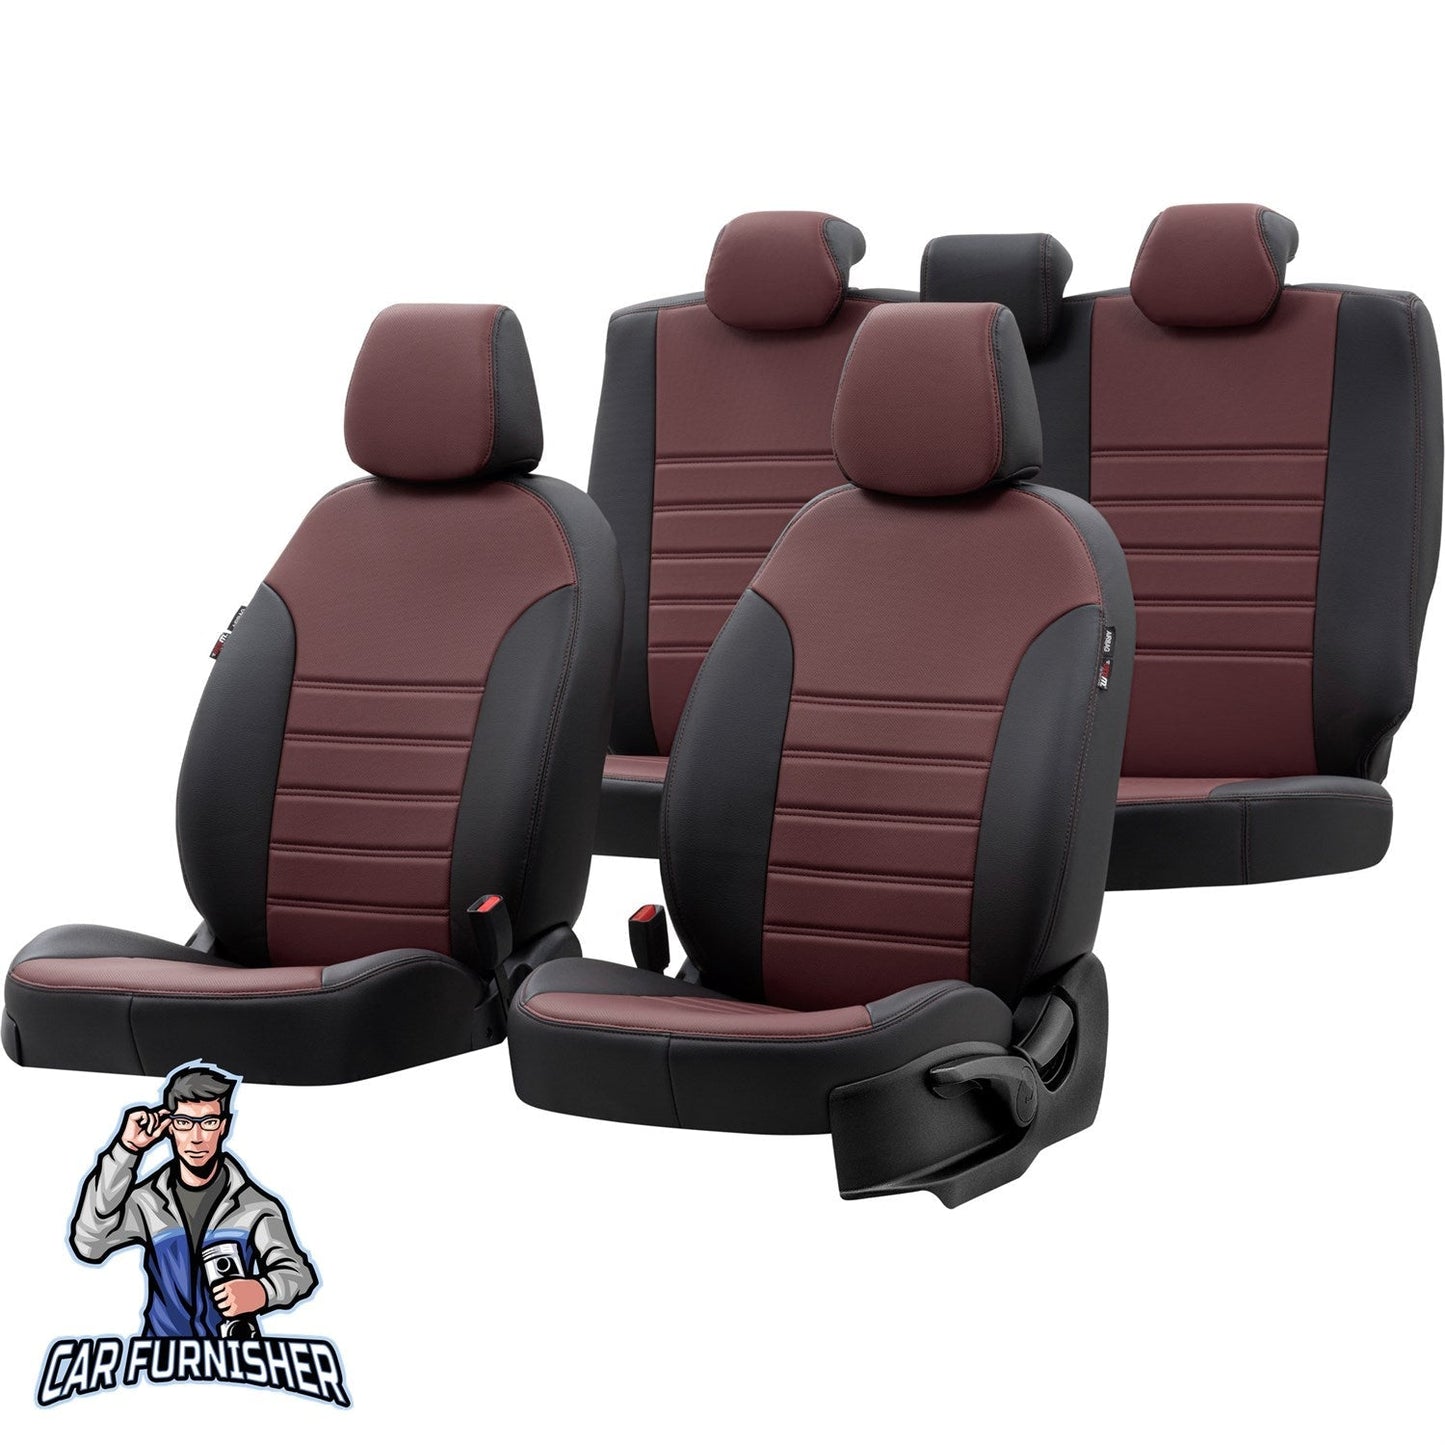 Renault Captur Seat Covers Istanbul Leather Design Burgundy Leather